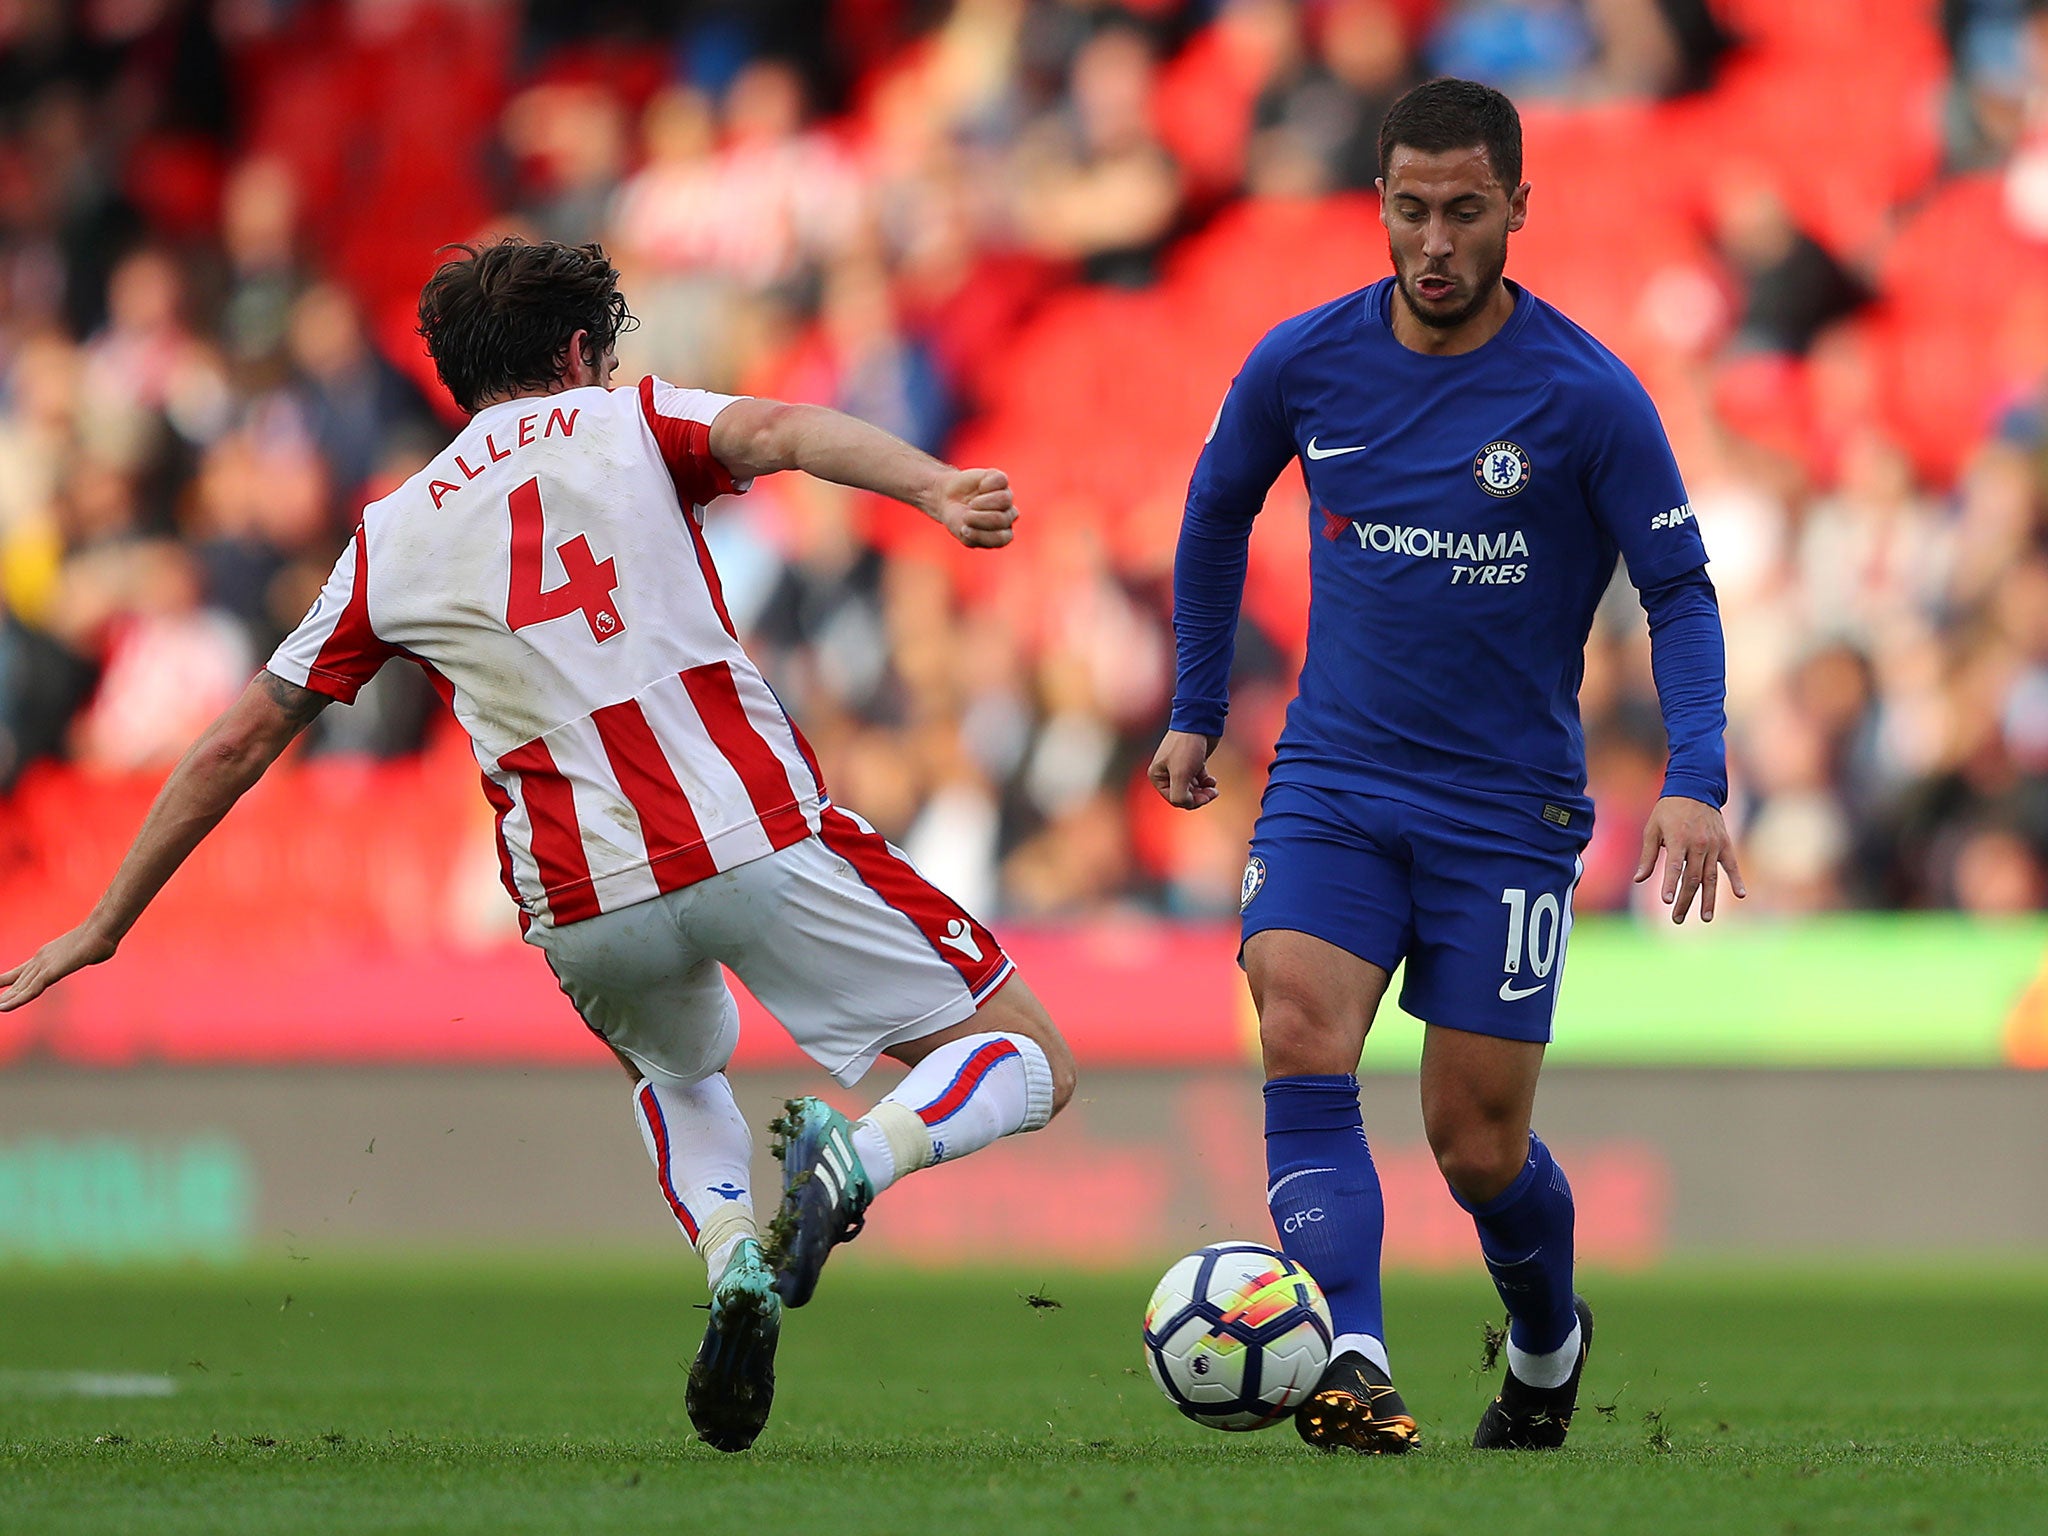 Chelsea won 4-0 in their last meeting with Stoke